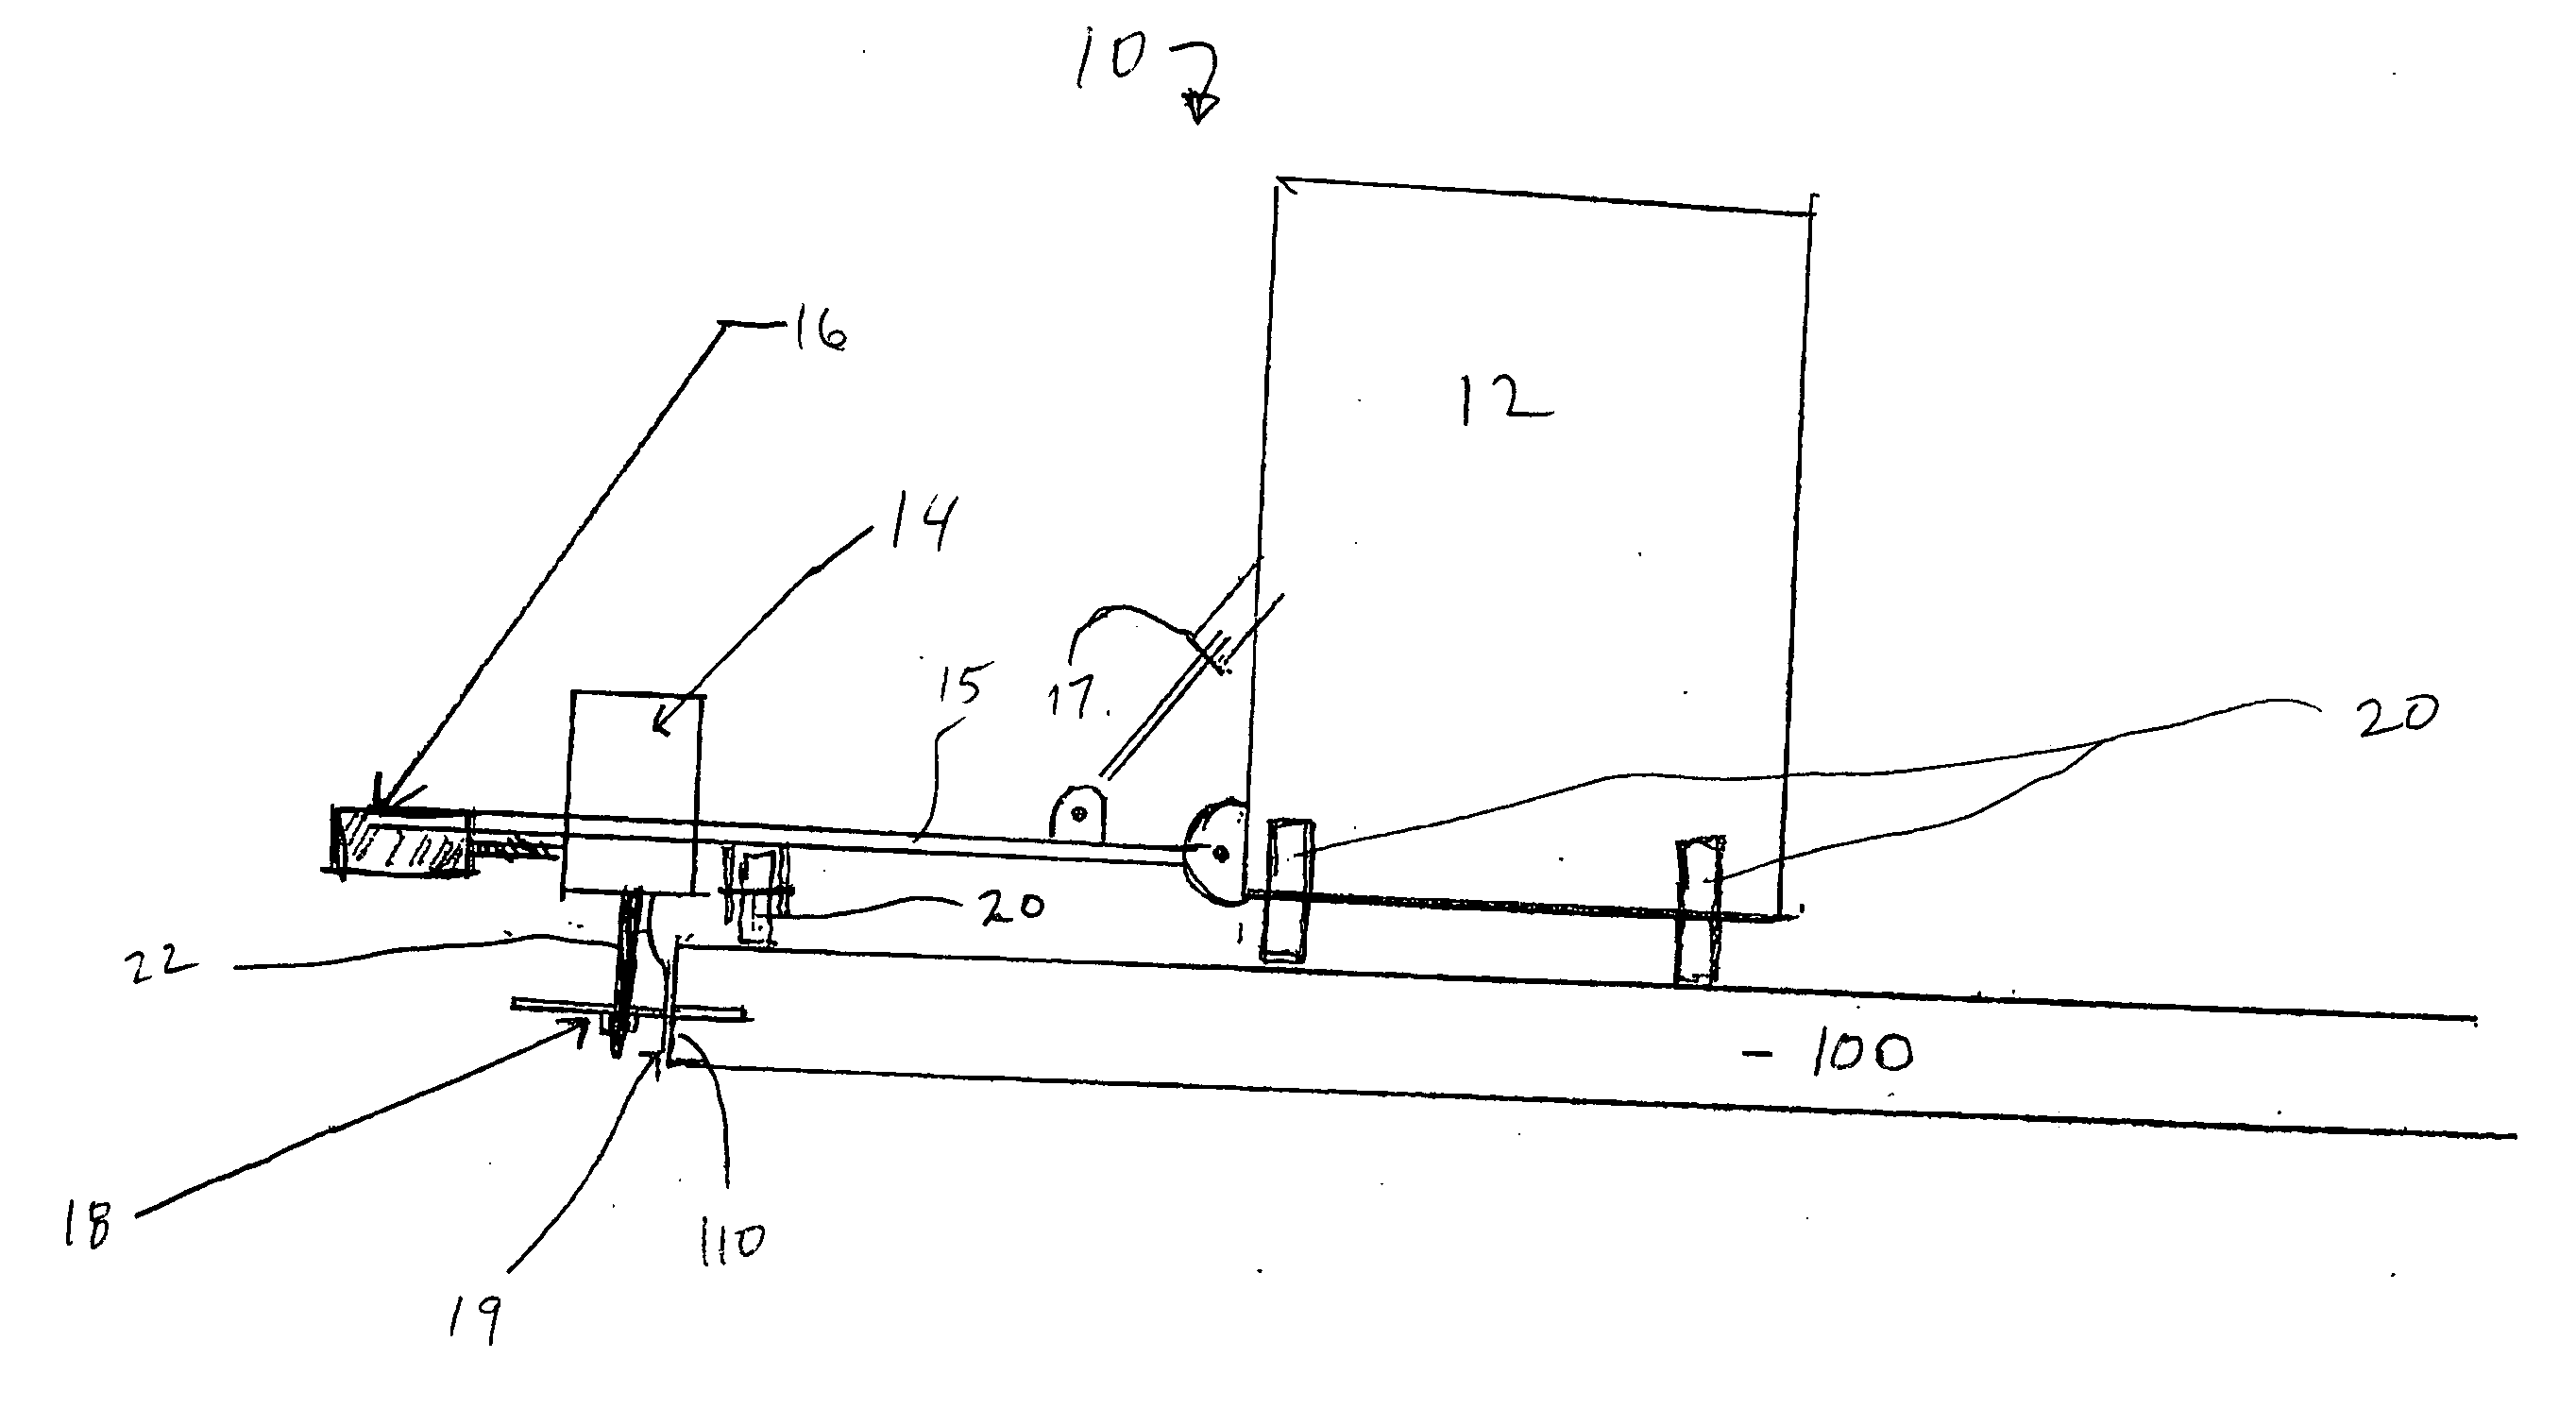 System and method for concrete slab connection